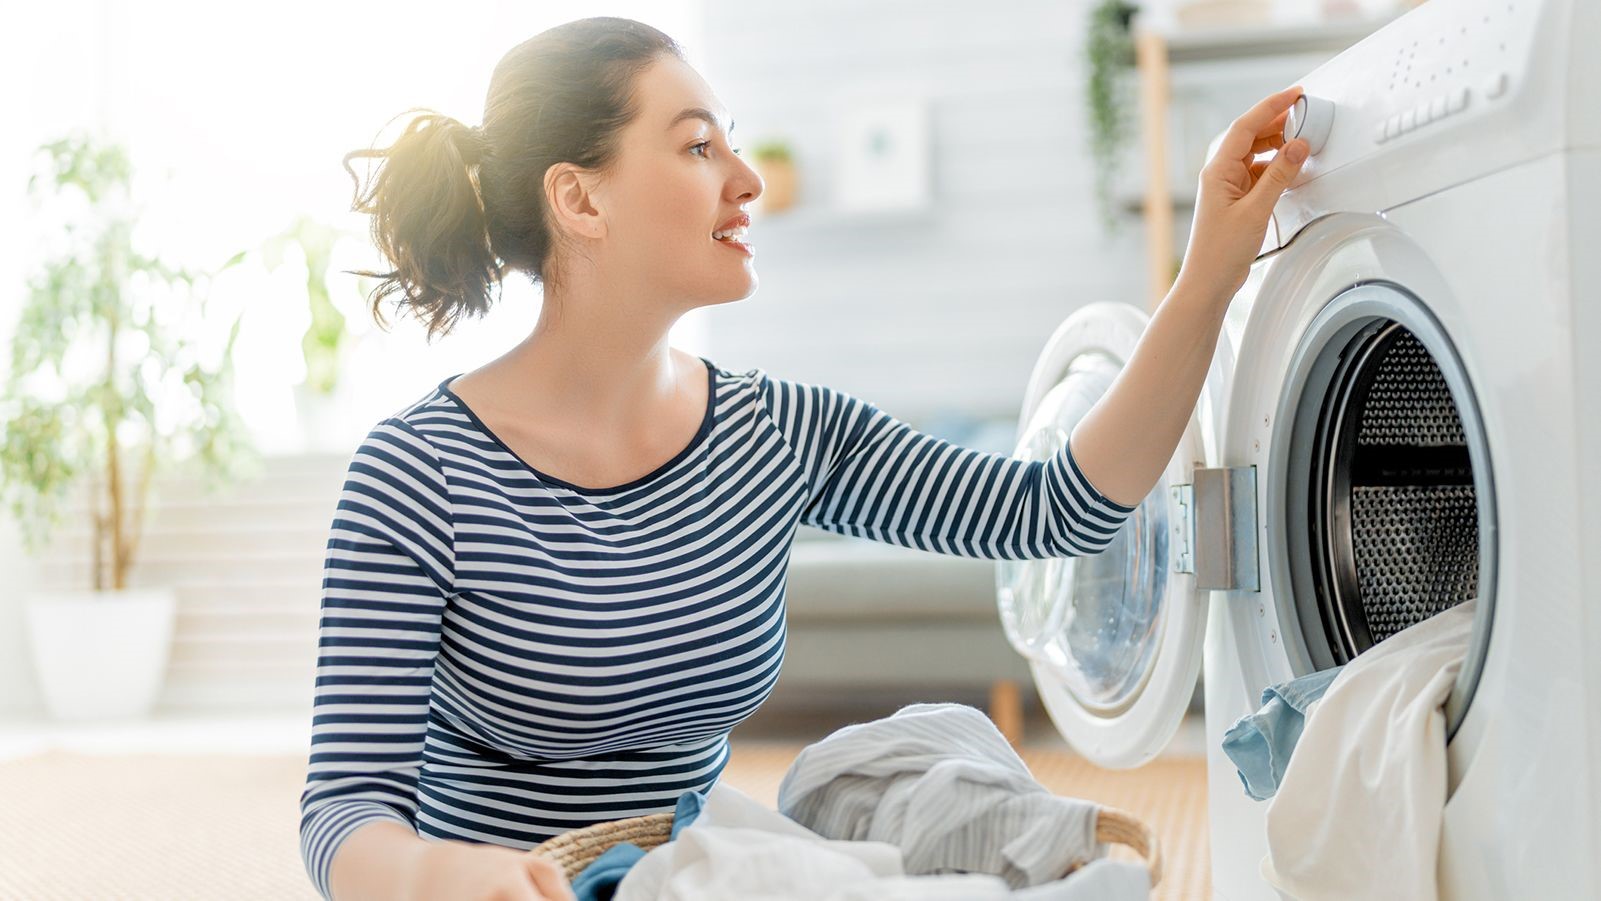 The 7 Most Affordable Cloth Dryers That Are Gentle on Your Clothes in 2022